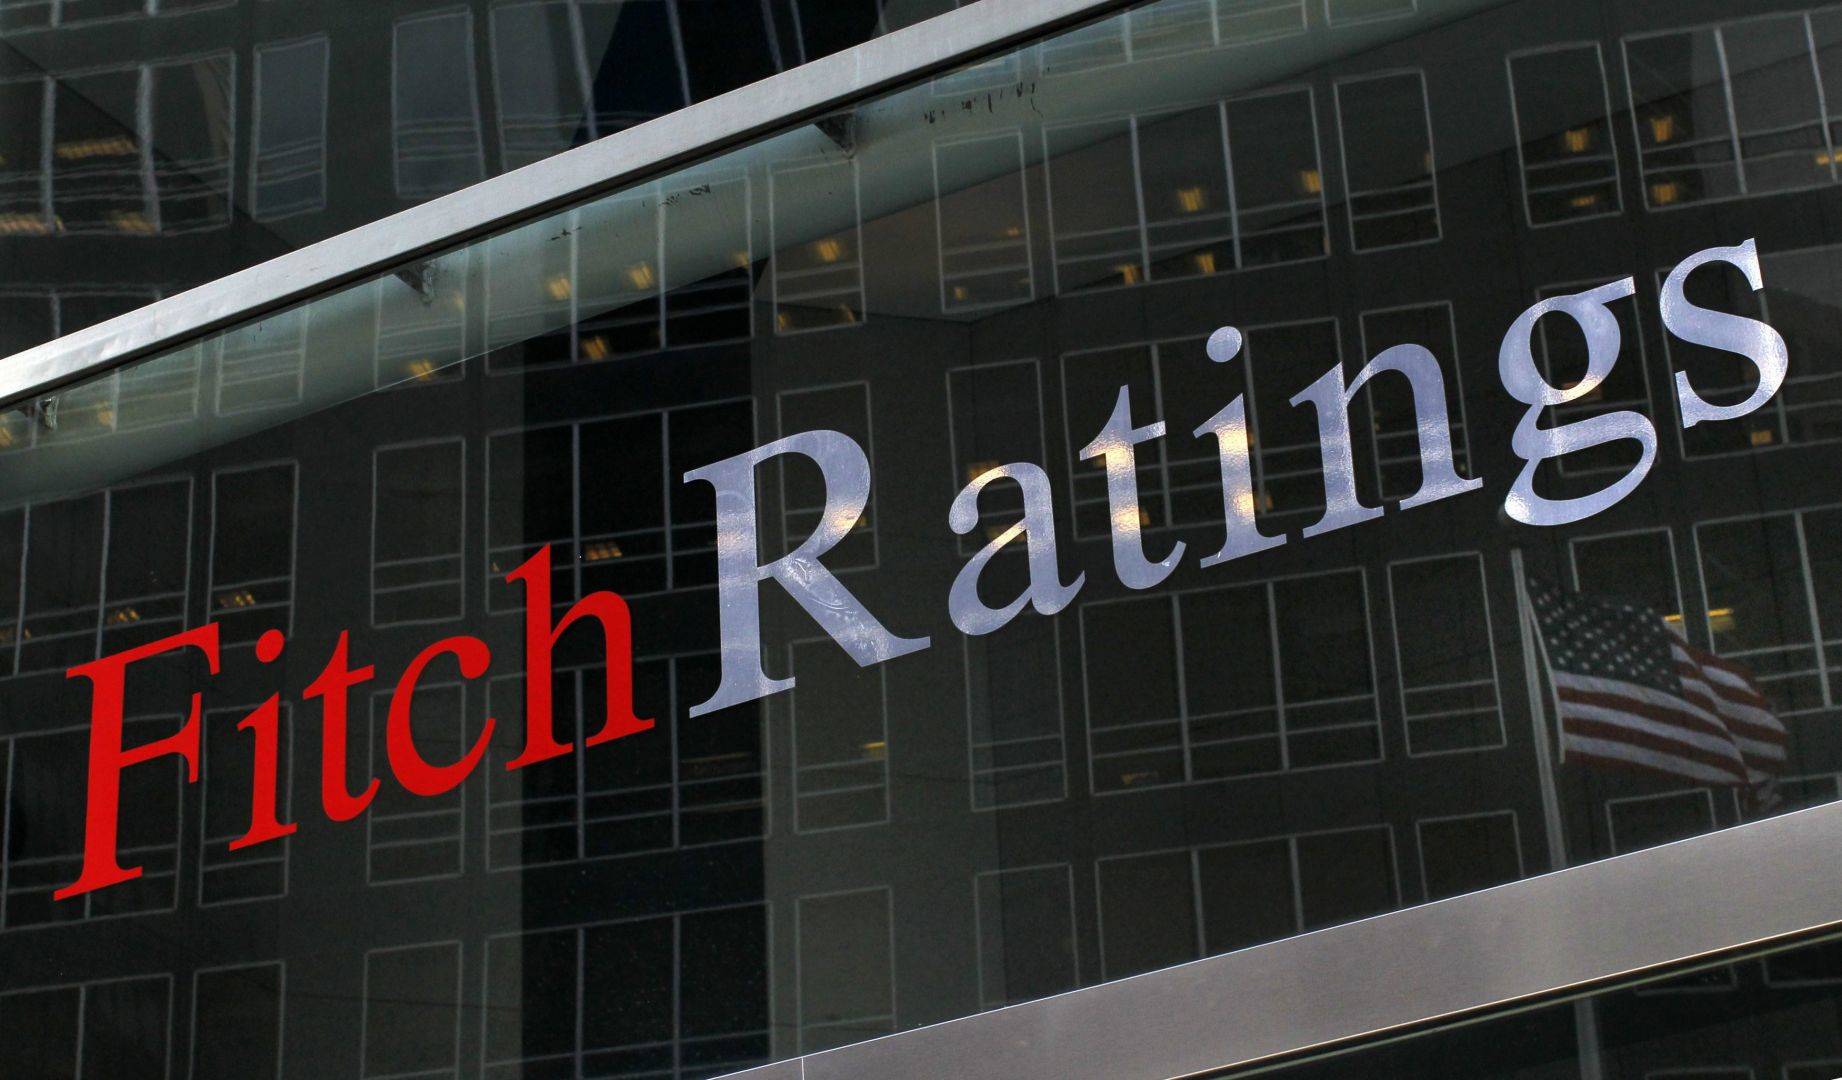 Fitch Ratings downgraded the US credit rating this week